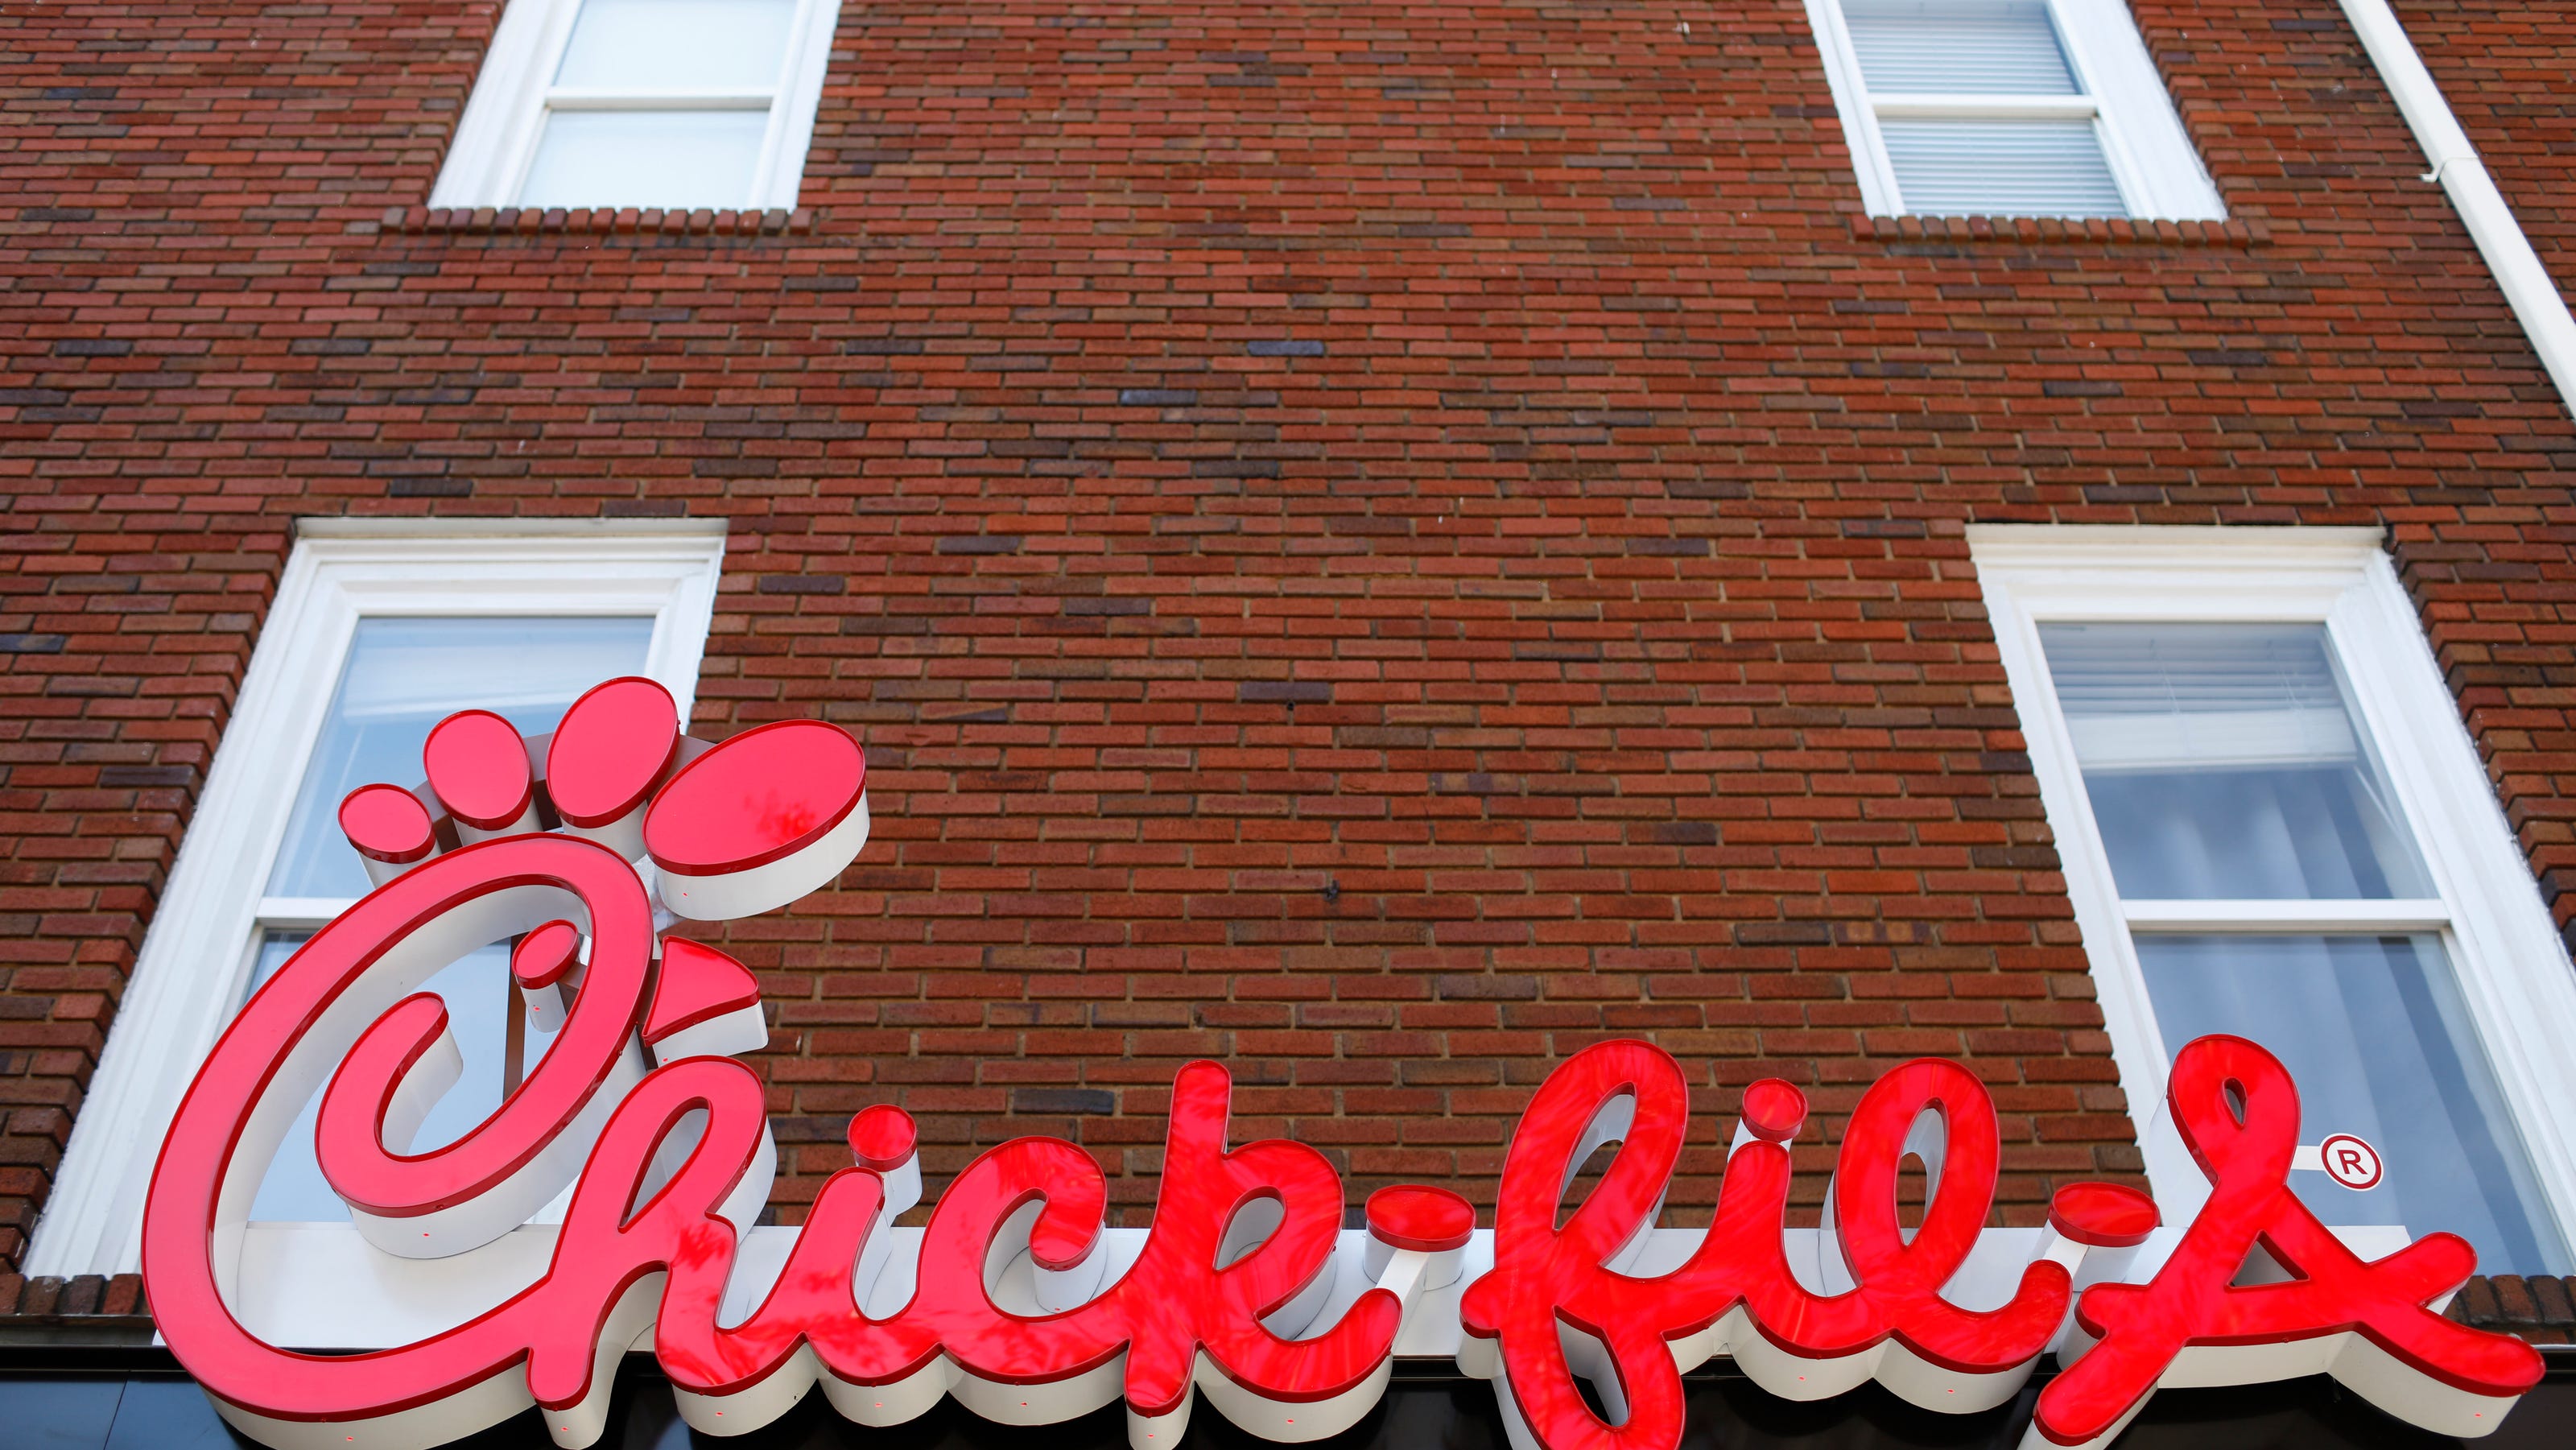 ChickfilA donates to Southern Poverty Law Center, abandoning values